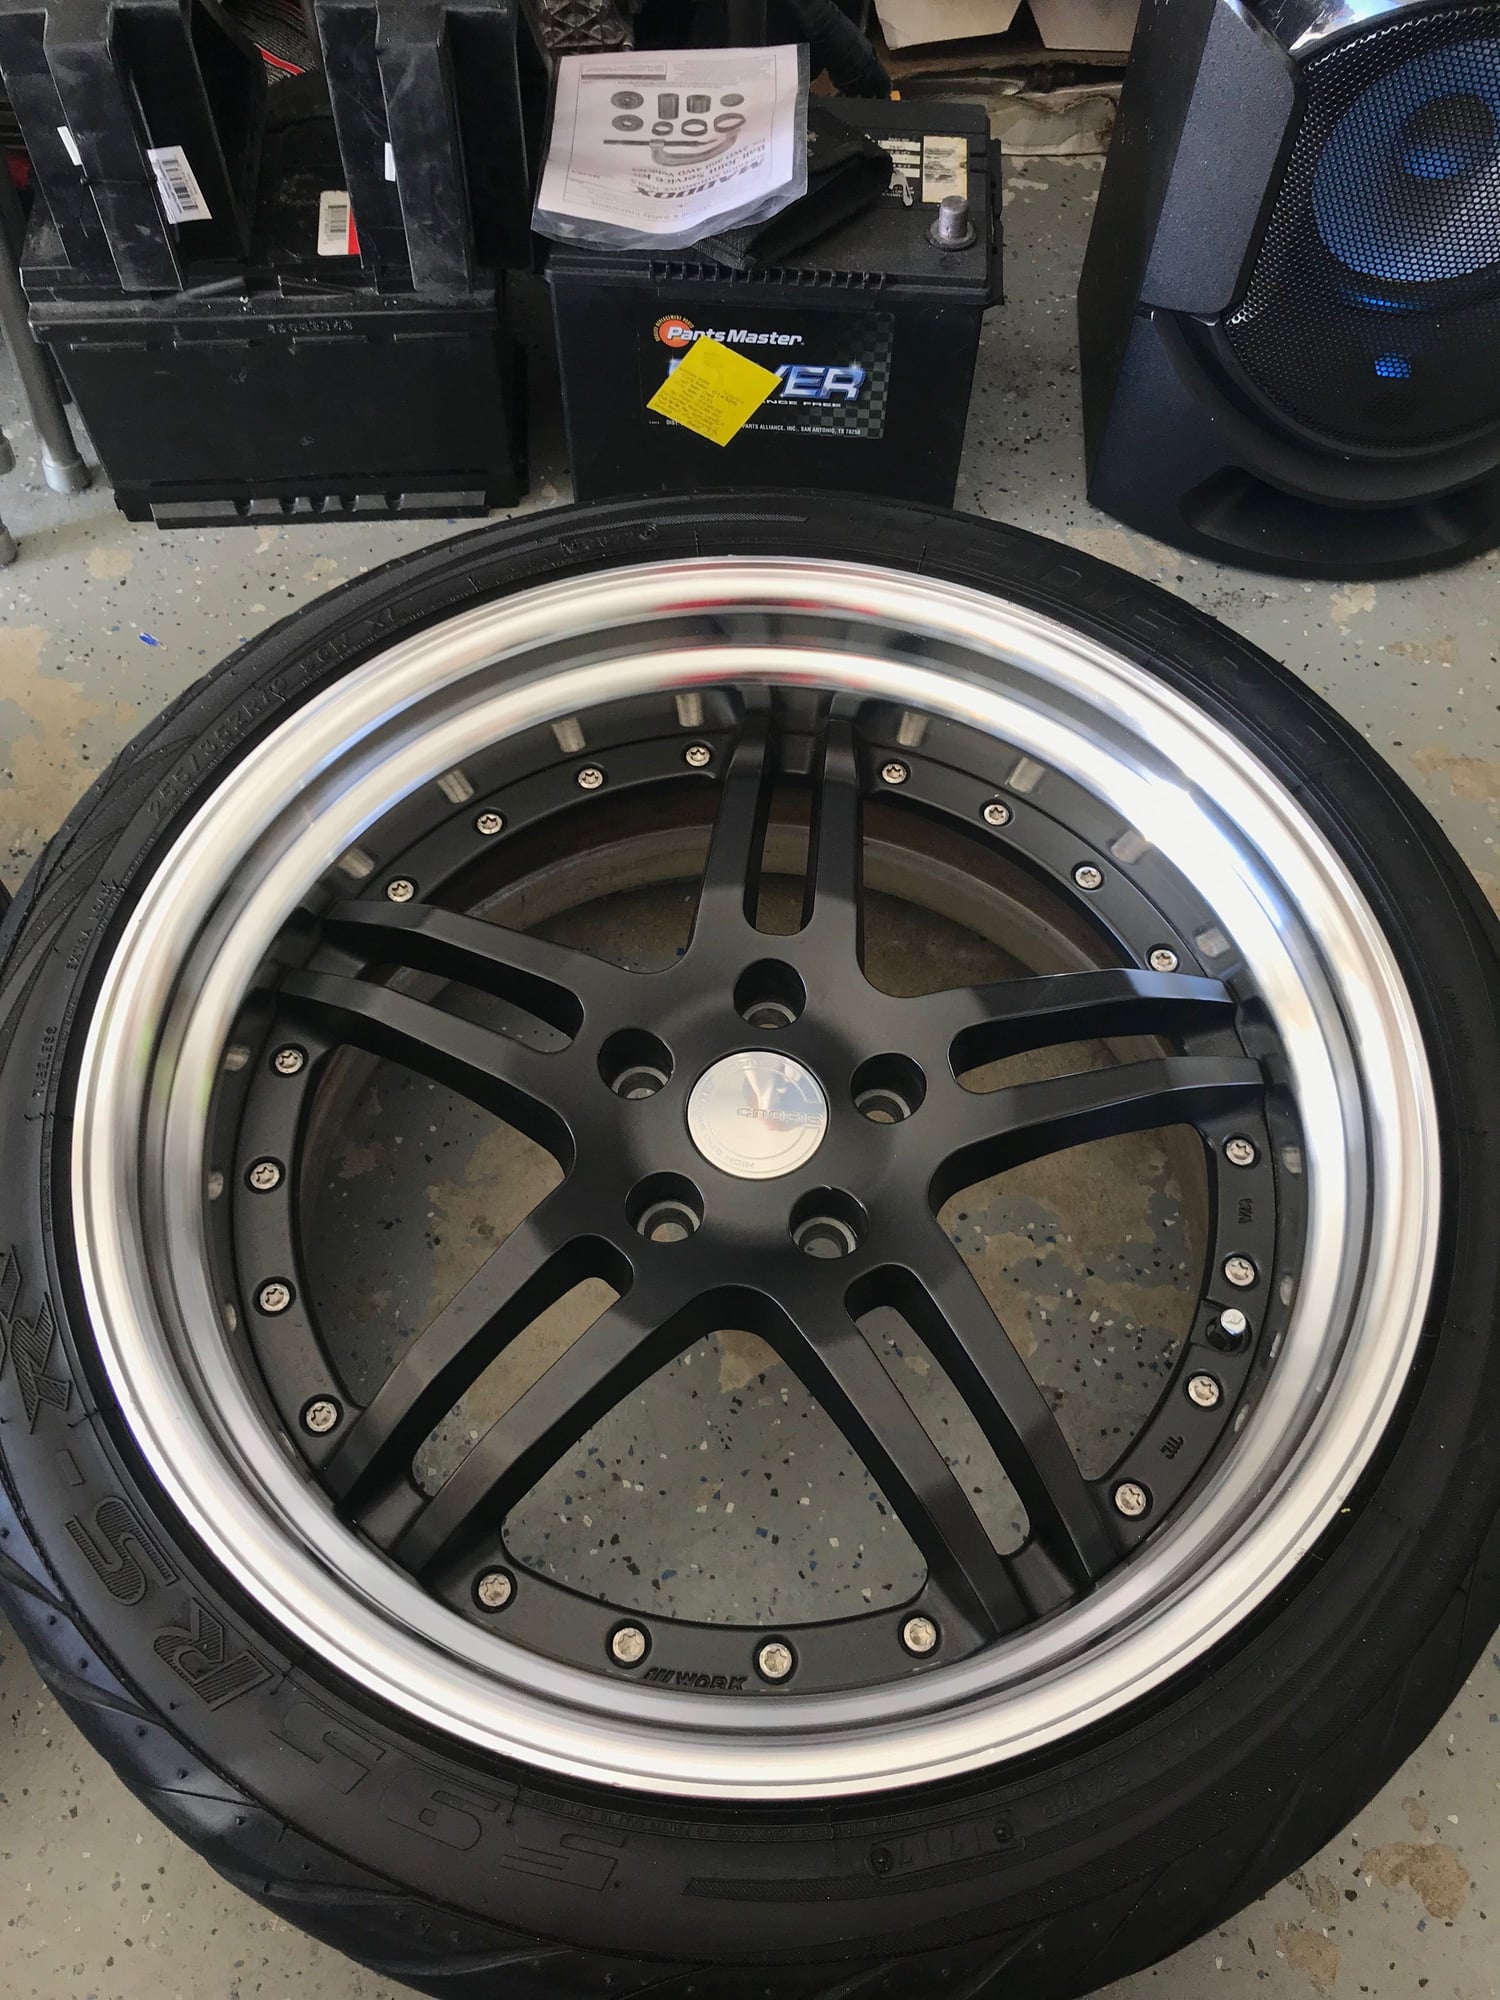 Wheels and Tires/Axles - Rare Work Gnosis GS-2 5x112 19x9 +25 O disc 19x10 +20 O disc w/ Tires - Used - San Diego, CA 91913, United States